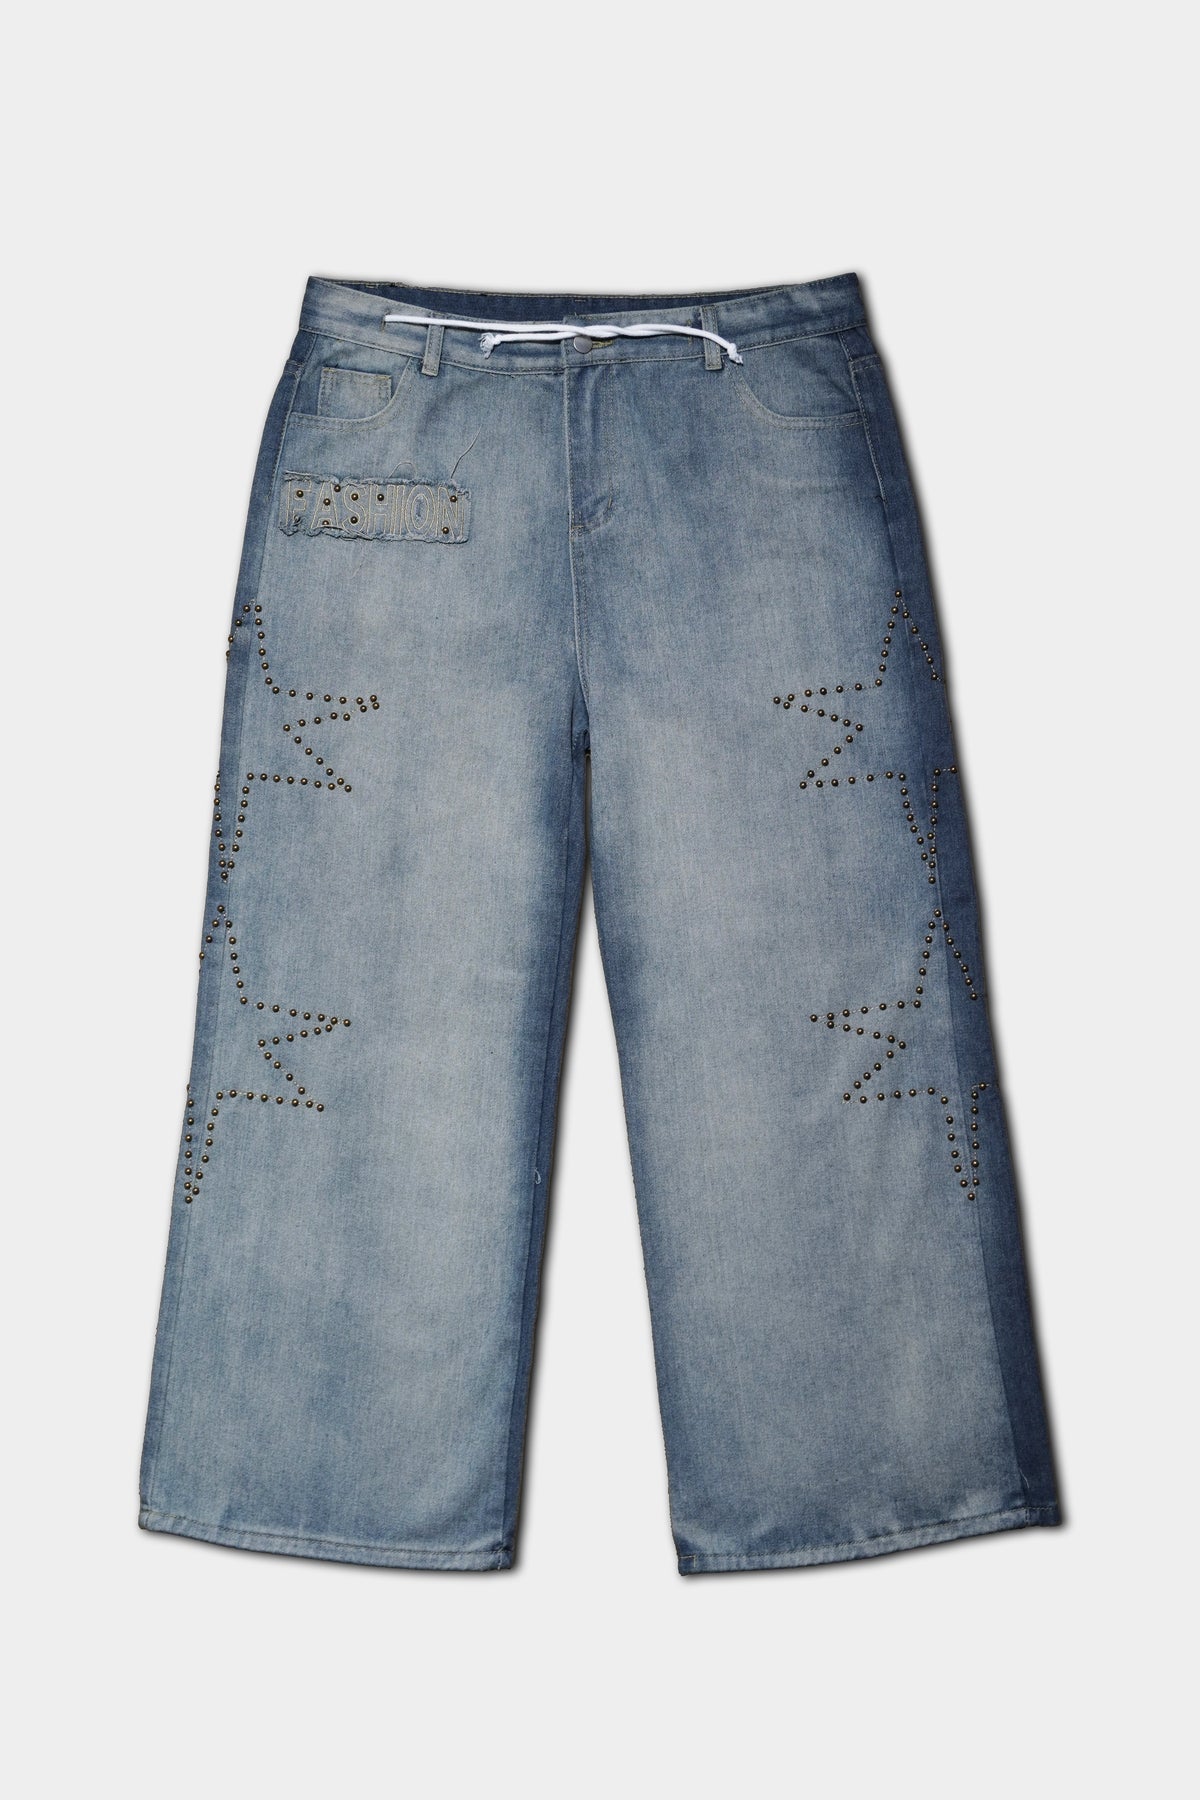 American Vintage Washed Baggy Jeans